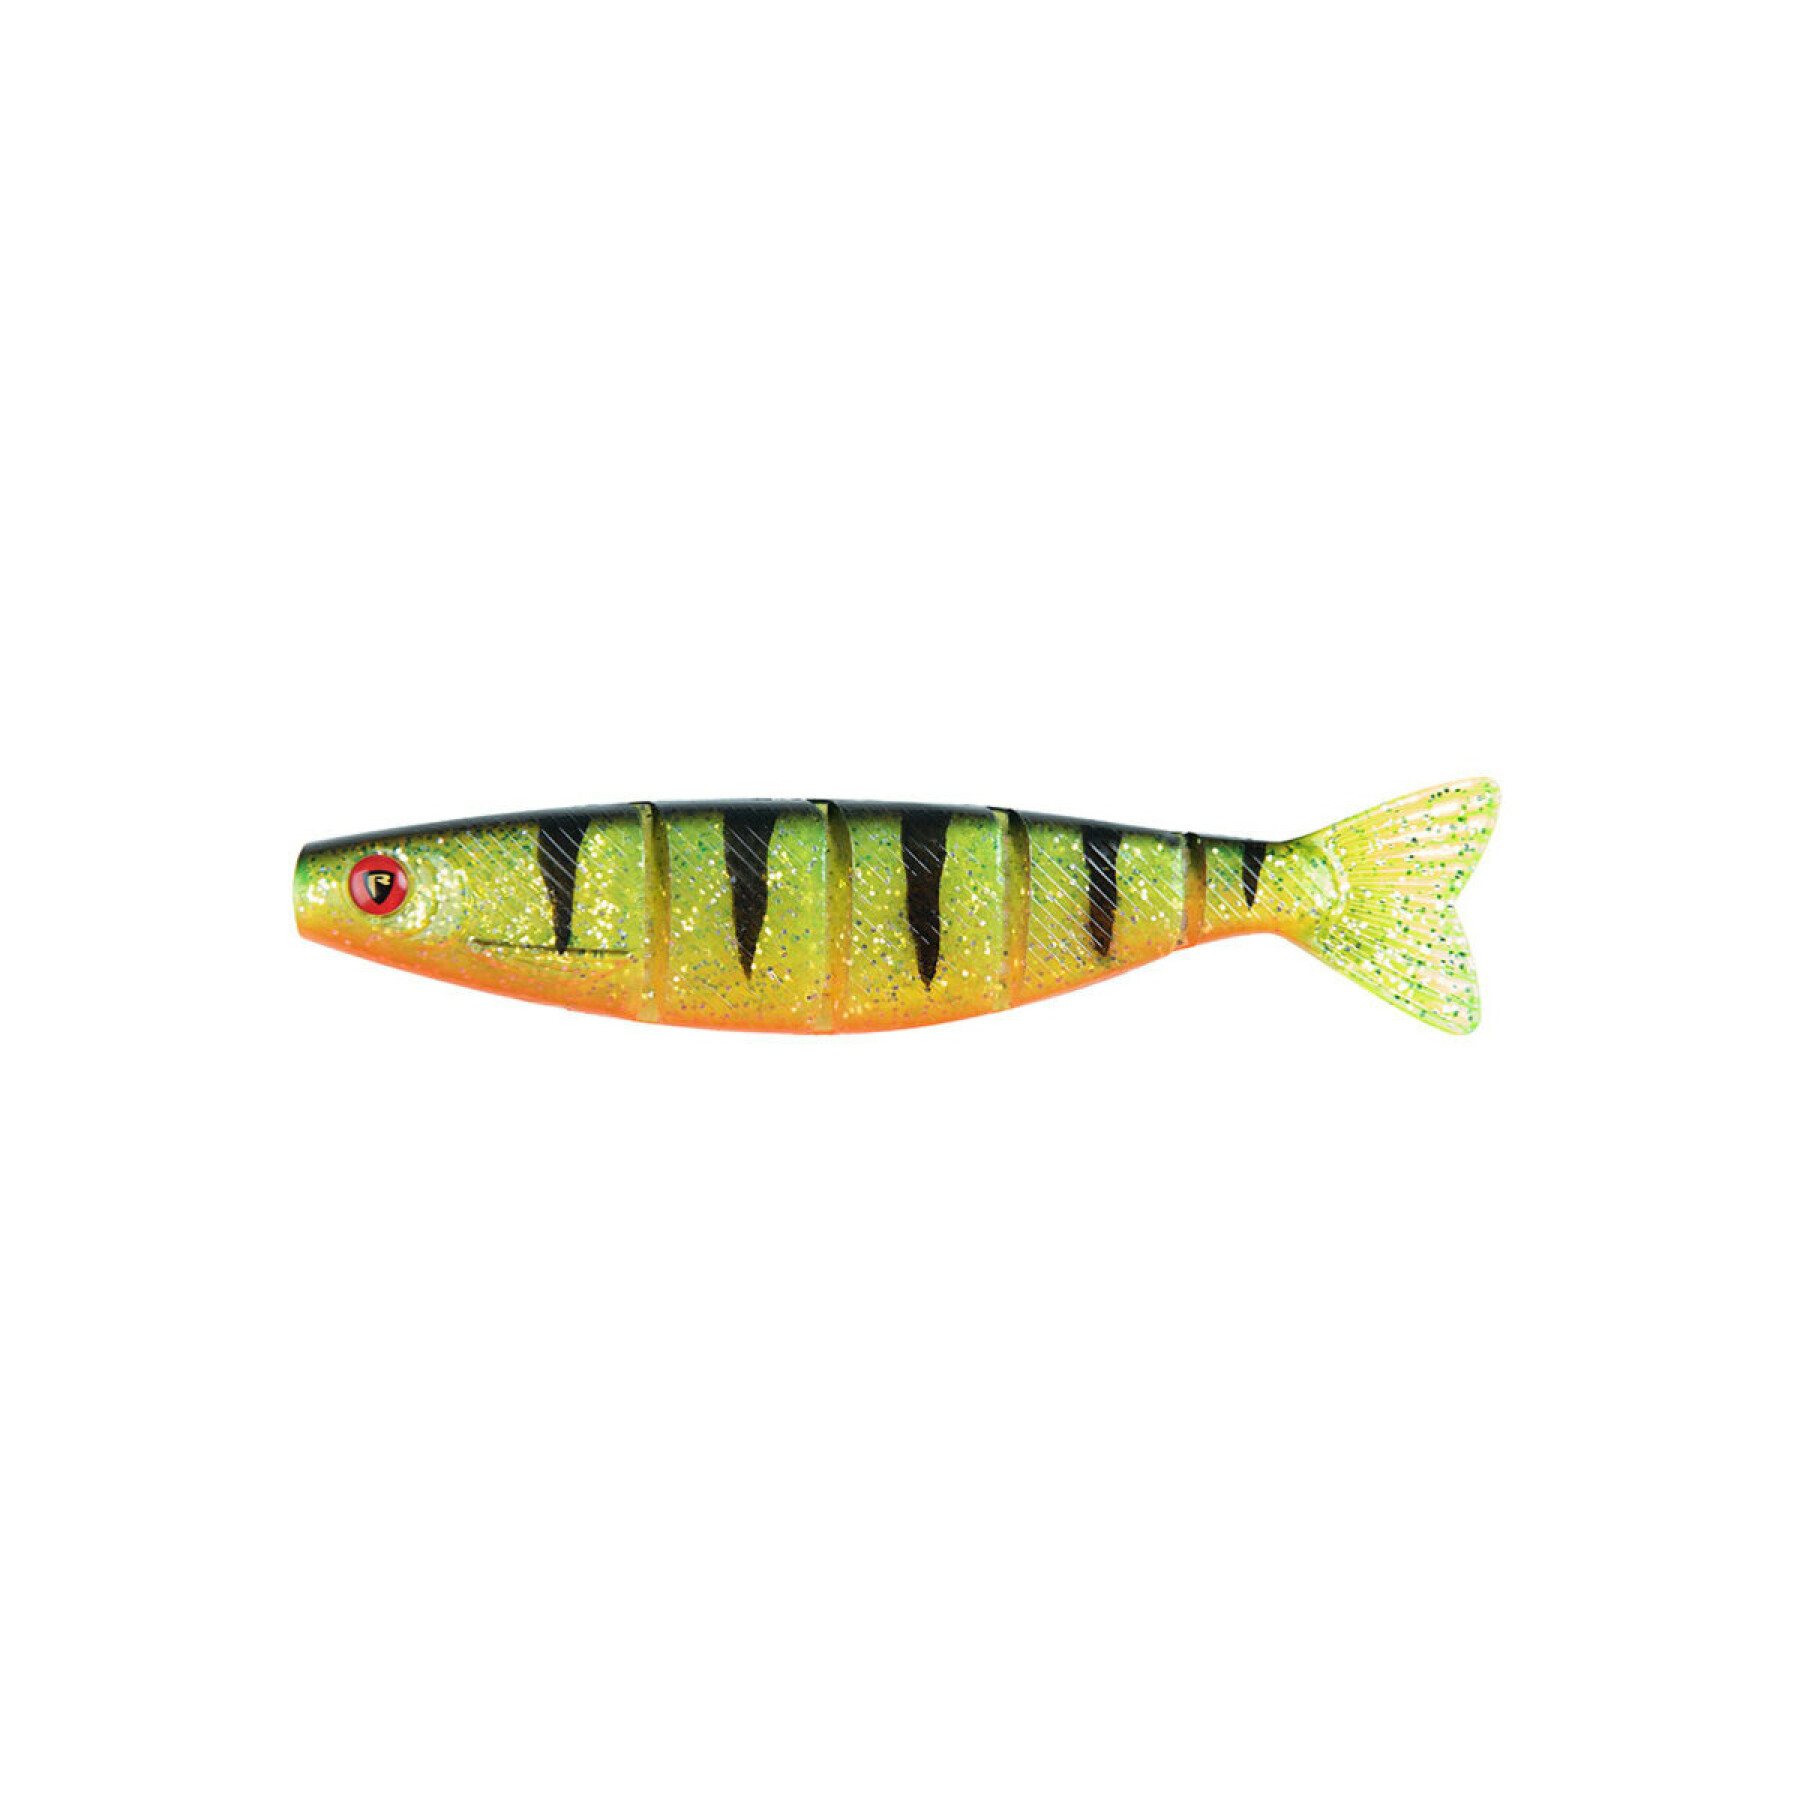 Soft lure Fox Rage Pro Shad Jointed